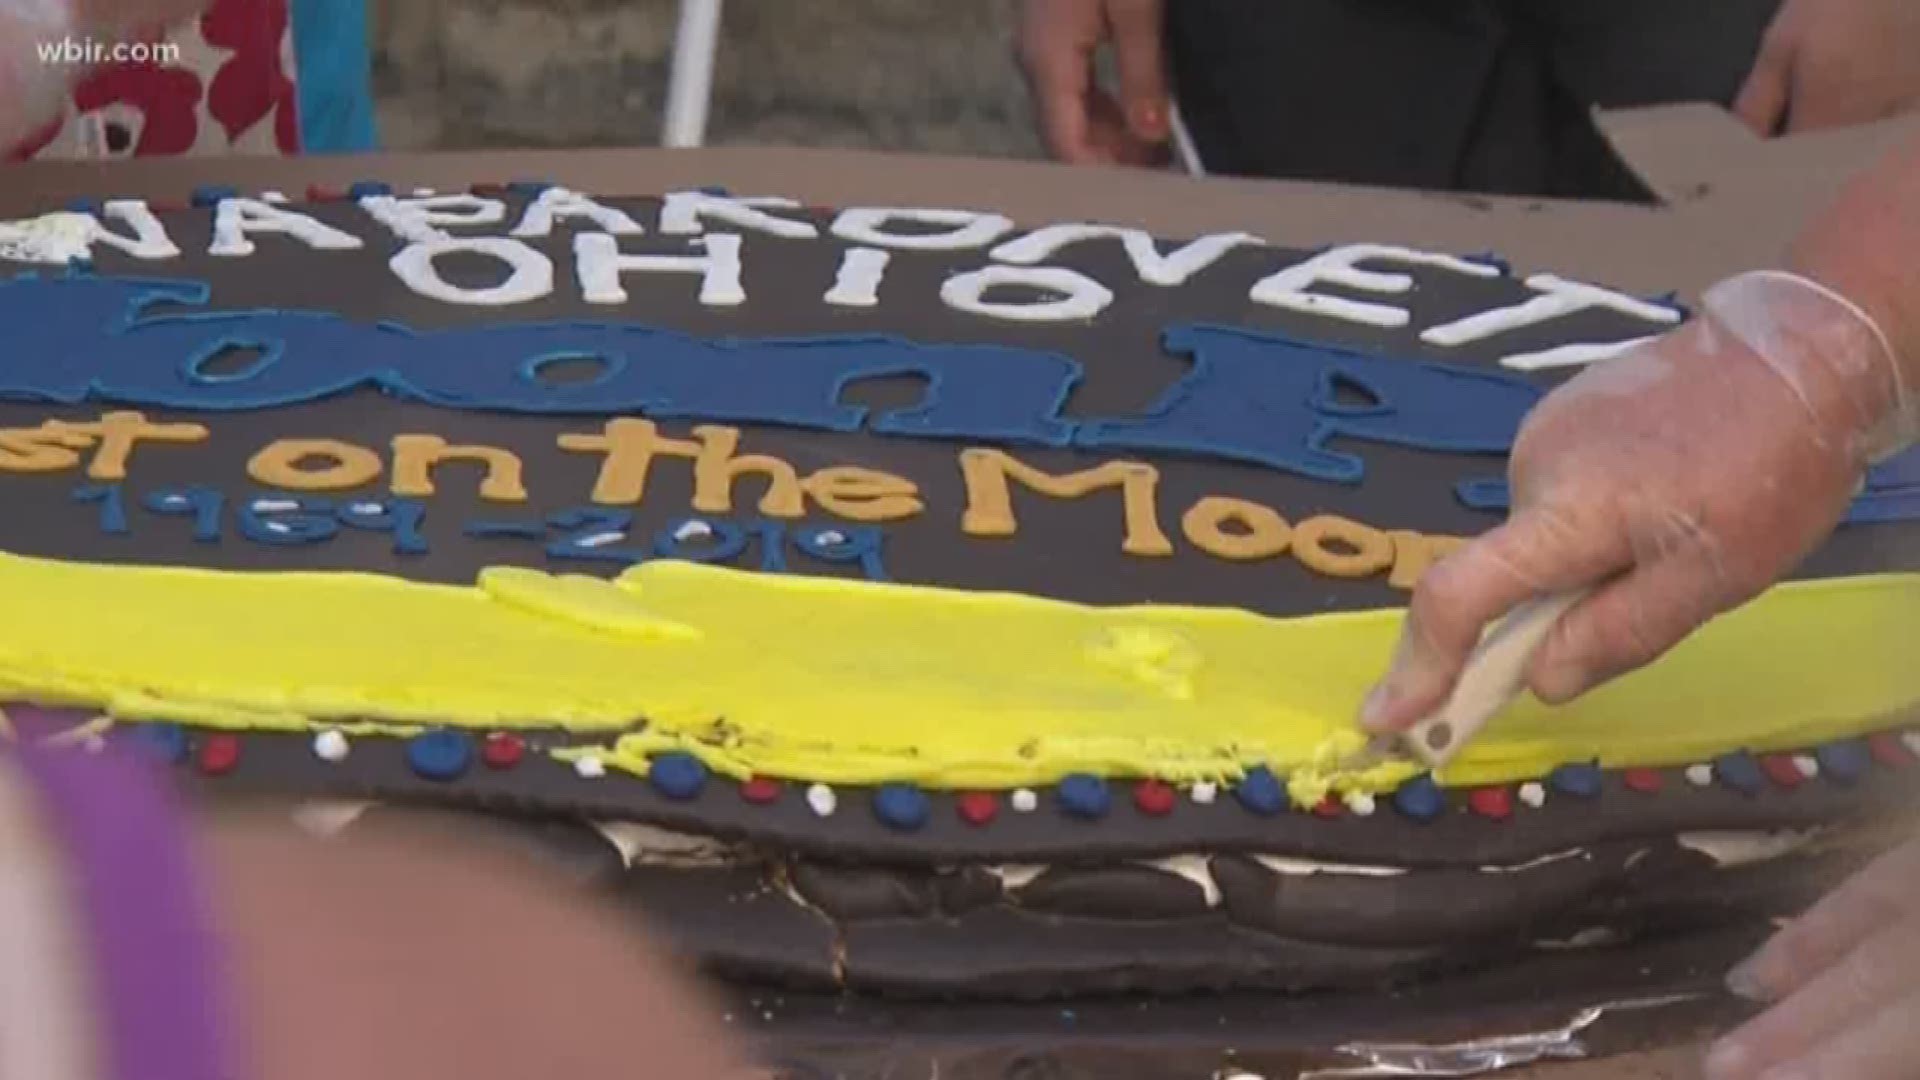 A Chattanooga Bakery created an out of this world treat for a celebration of an American hero -- Neil Armstrong.